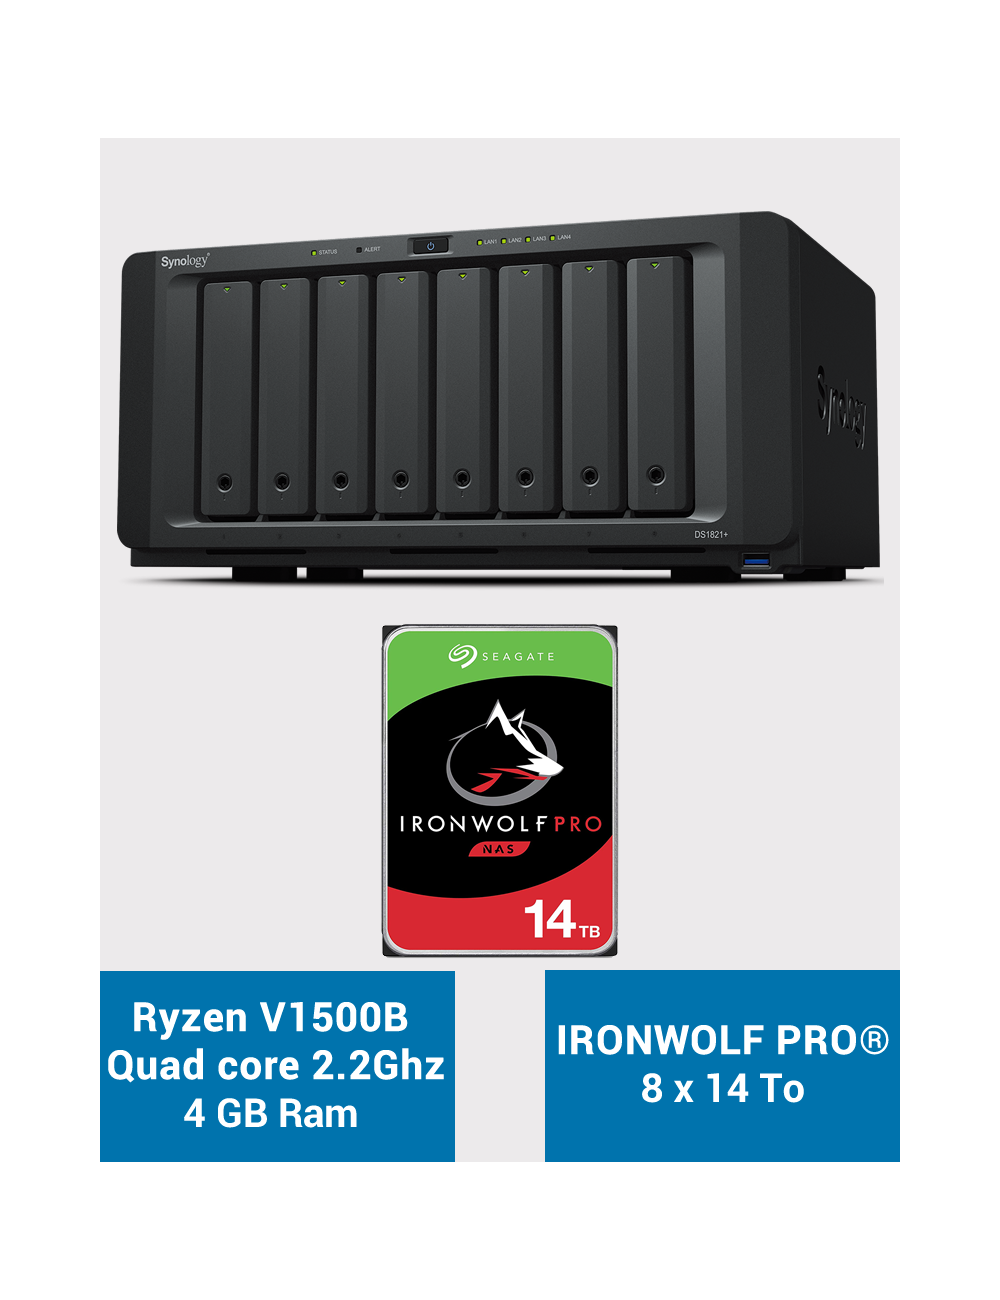 Synology DS1821+ Serveur NAS 8 baies IRONWOLF PRO 112To (8x14To)